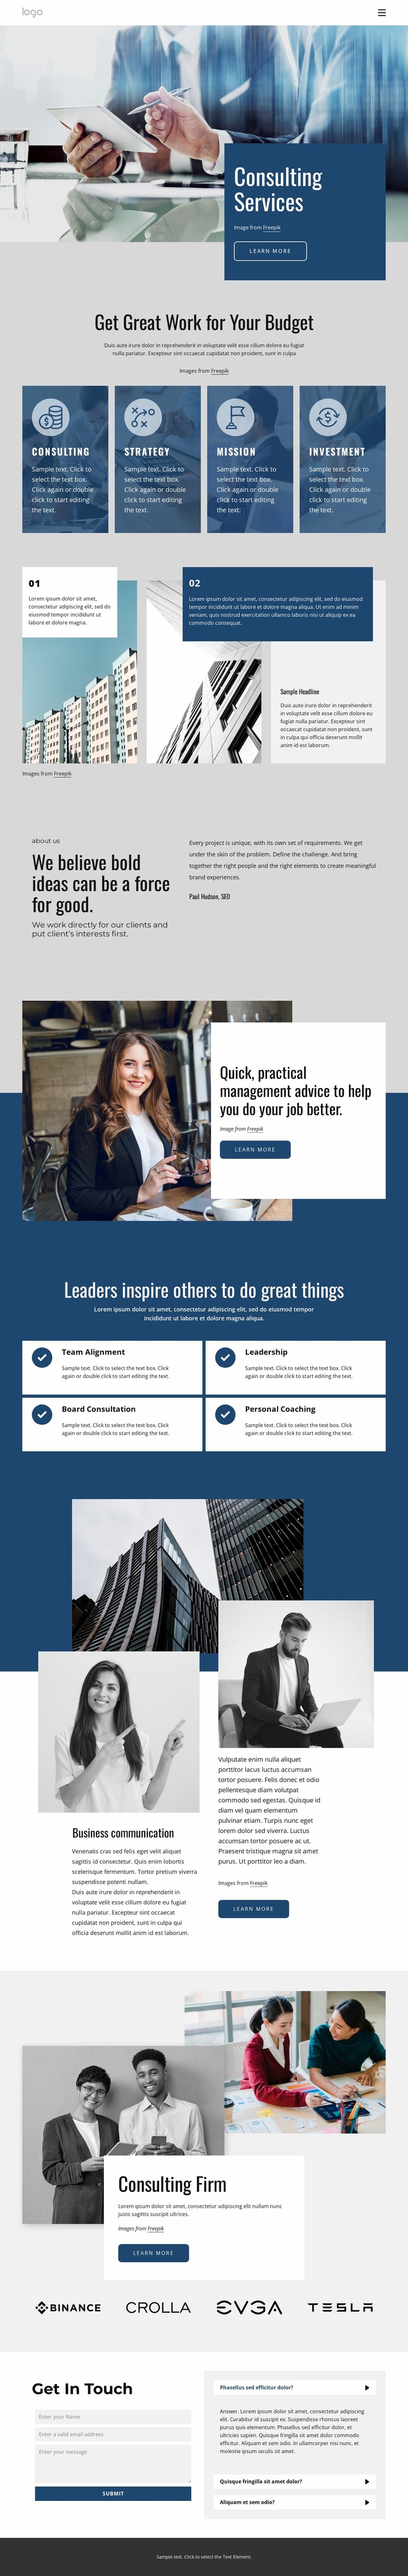 Professional consulting service firm Website Builder Templates